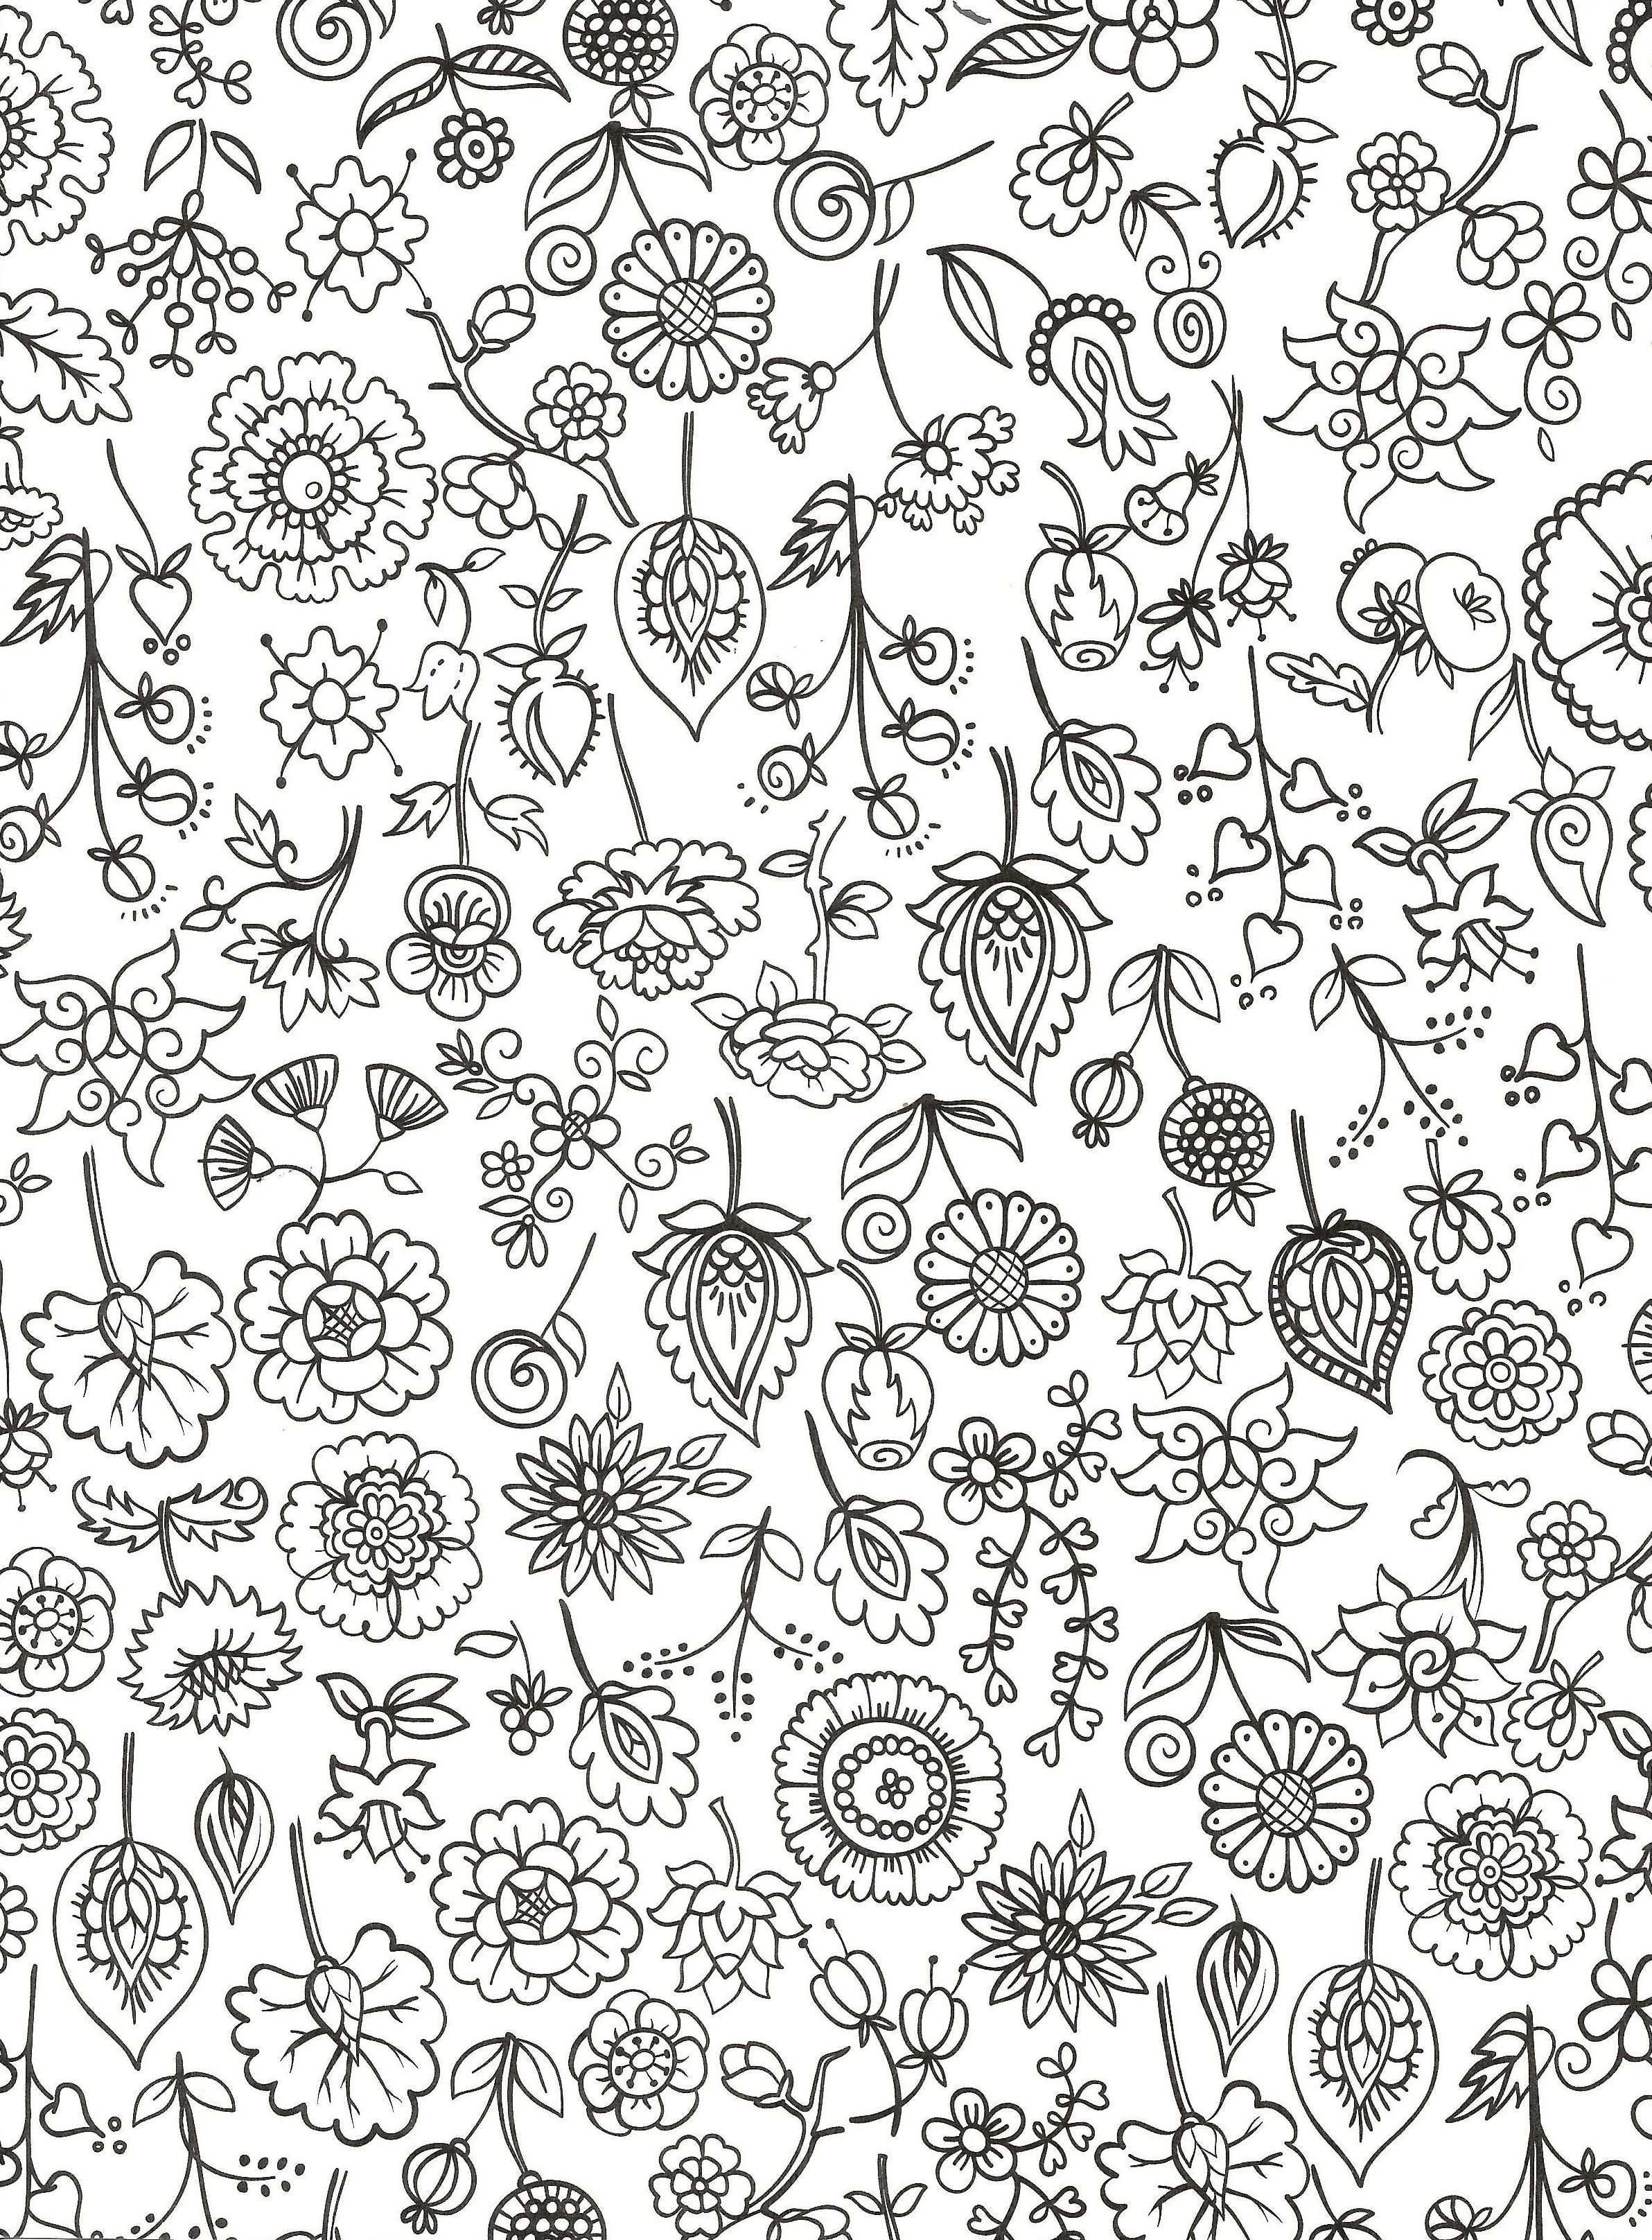 Floral Coloring Page For Adults Seamless Background How To Draw Hands Floral Illustra